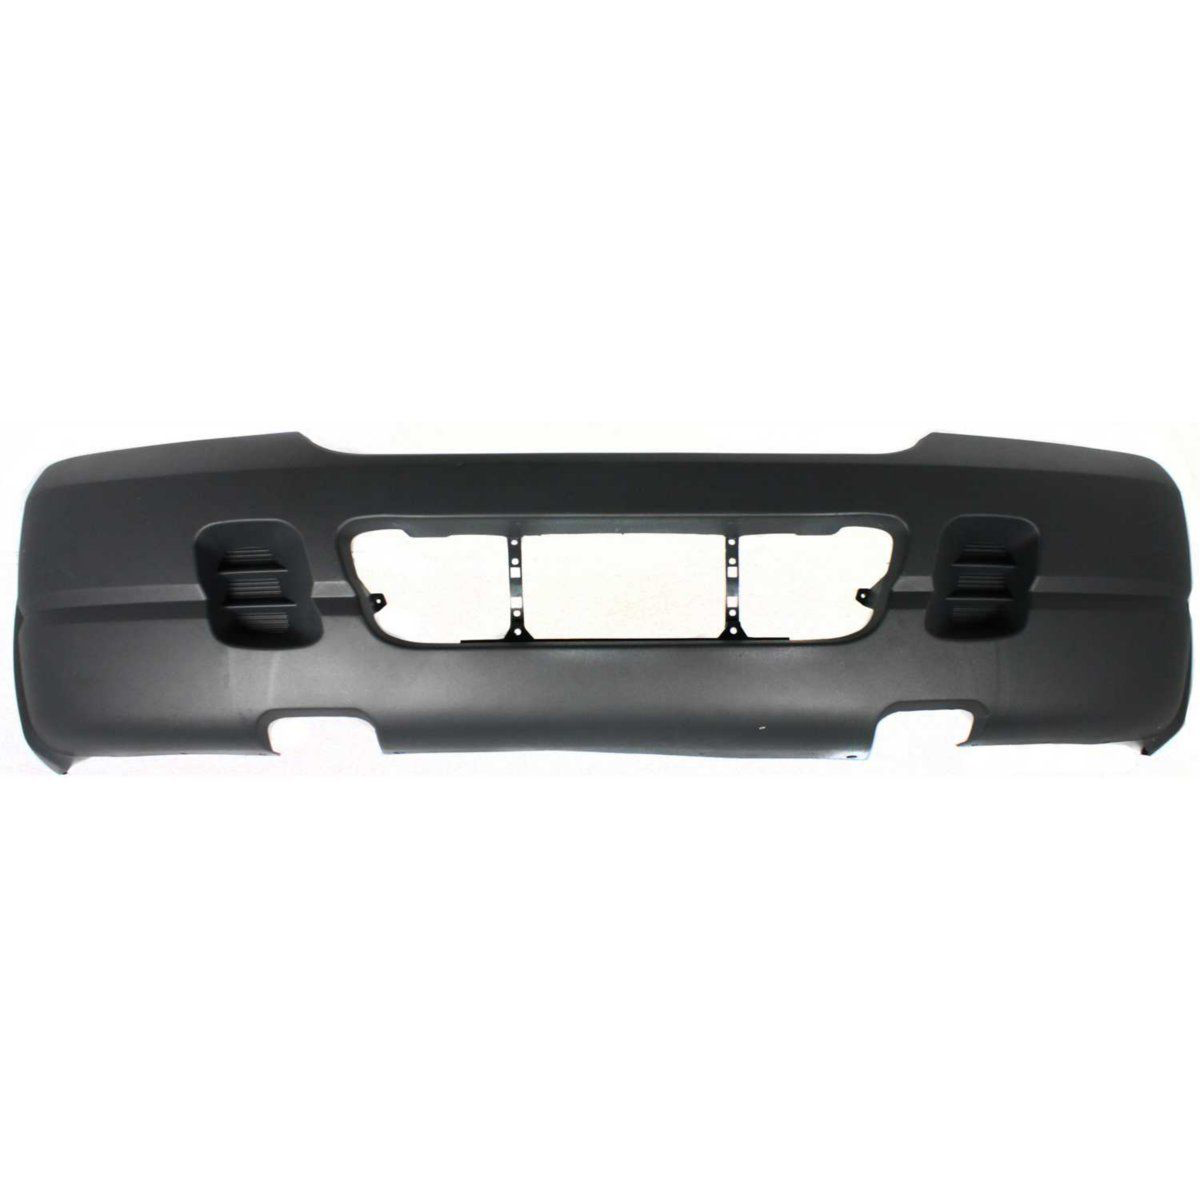 2002-2005 FORD EXPLORER Front Bumper Cover except Sport  XLS  w/wheel opening molding  cool gray Painted to Match